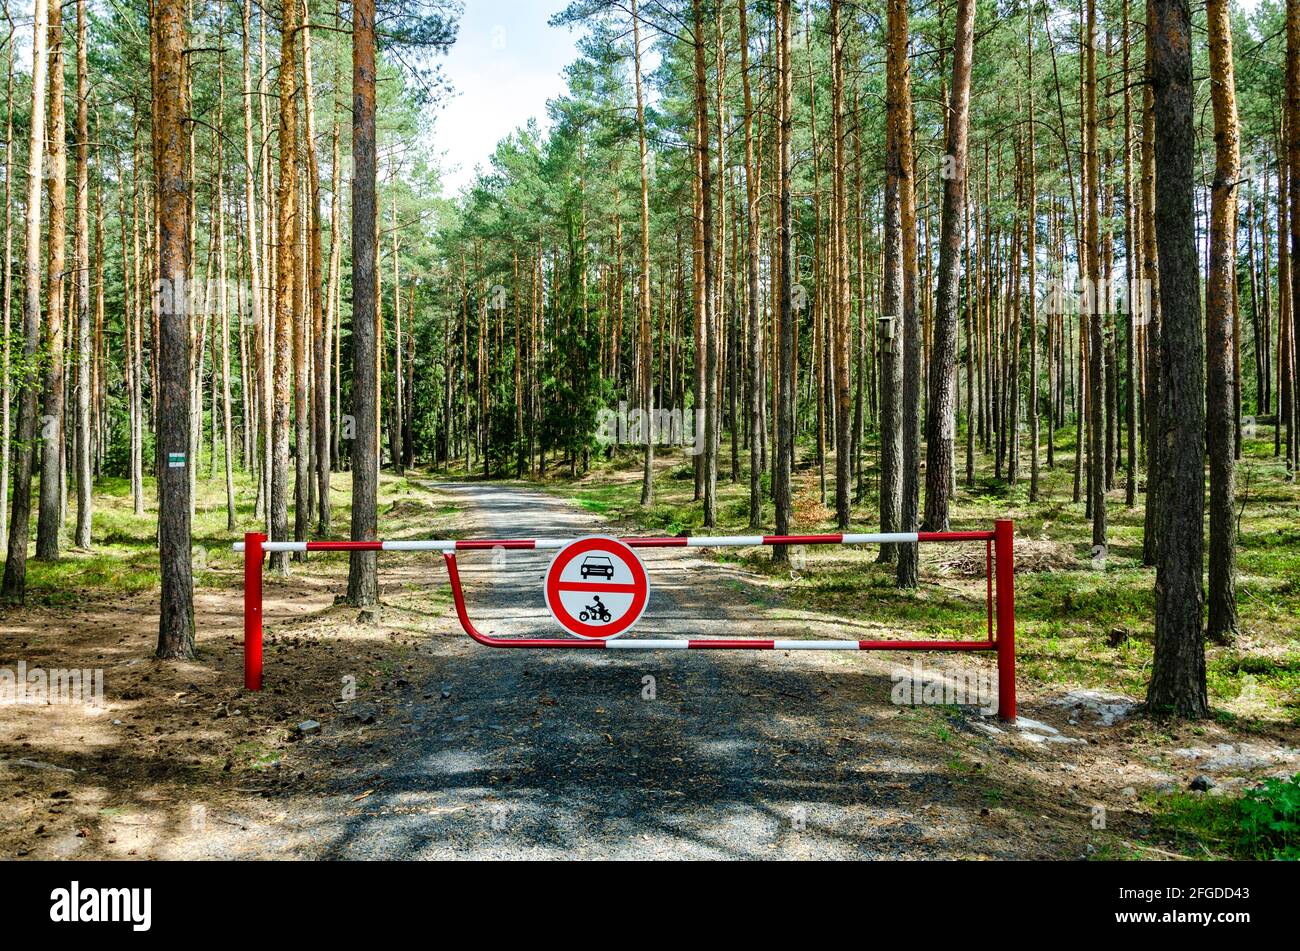 Red and white traffic barrier with road sign „no entry“ for stopping cars and motorbikes to enter into the wood Stock Photo